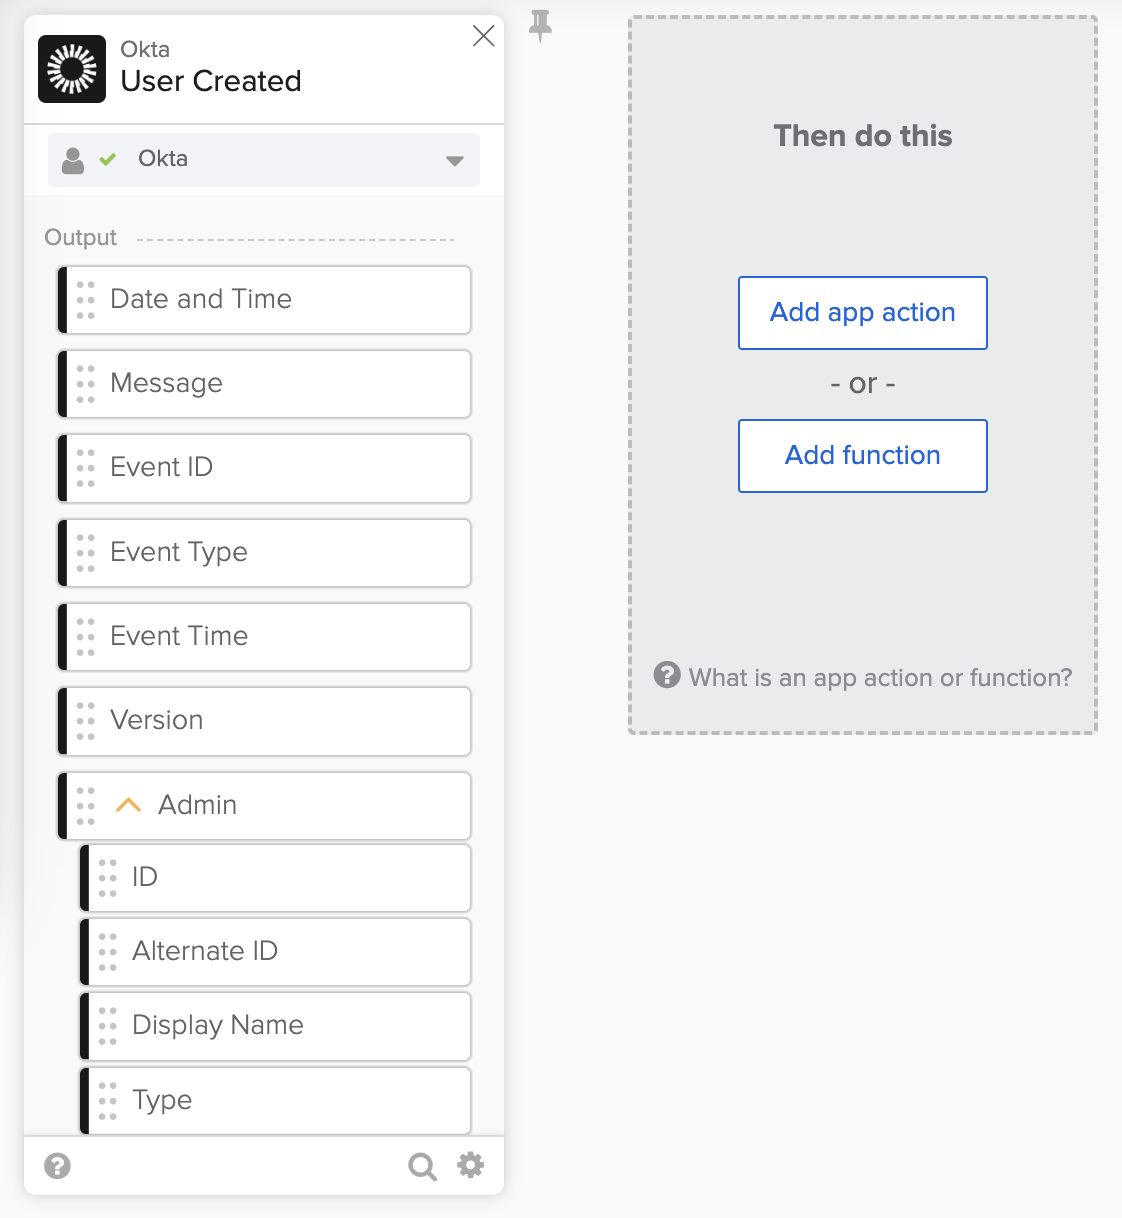 workflows_ms_notify_email_usercreated_event.png (1122×1218)